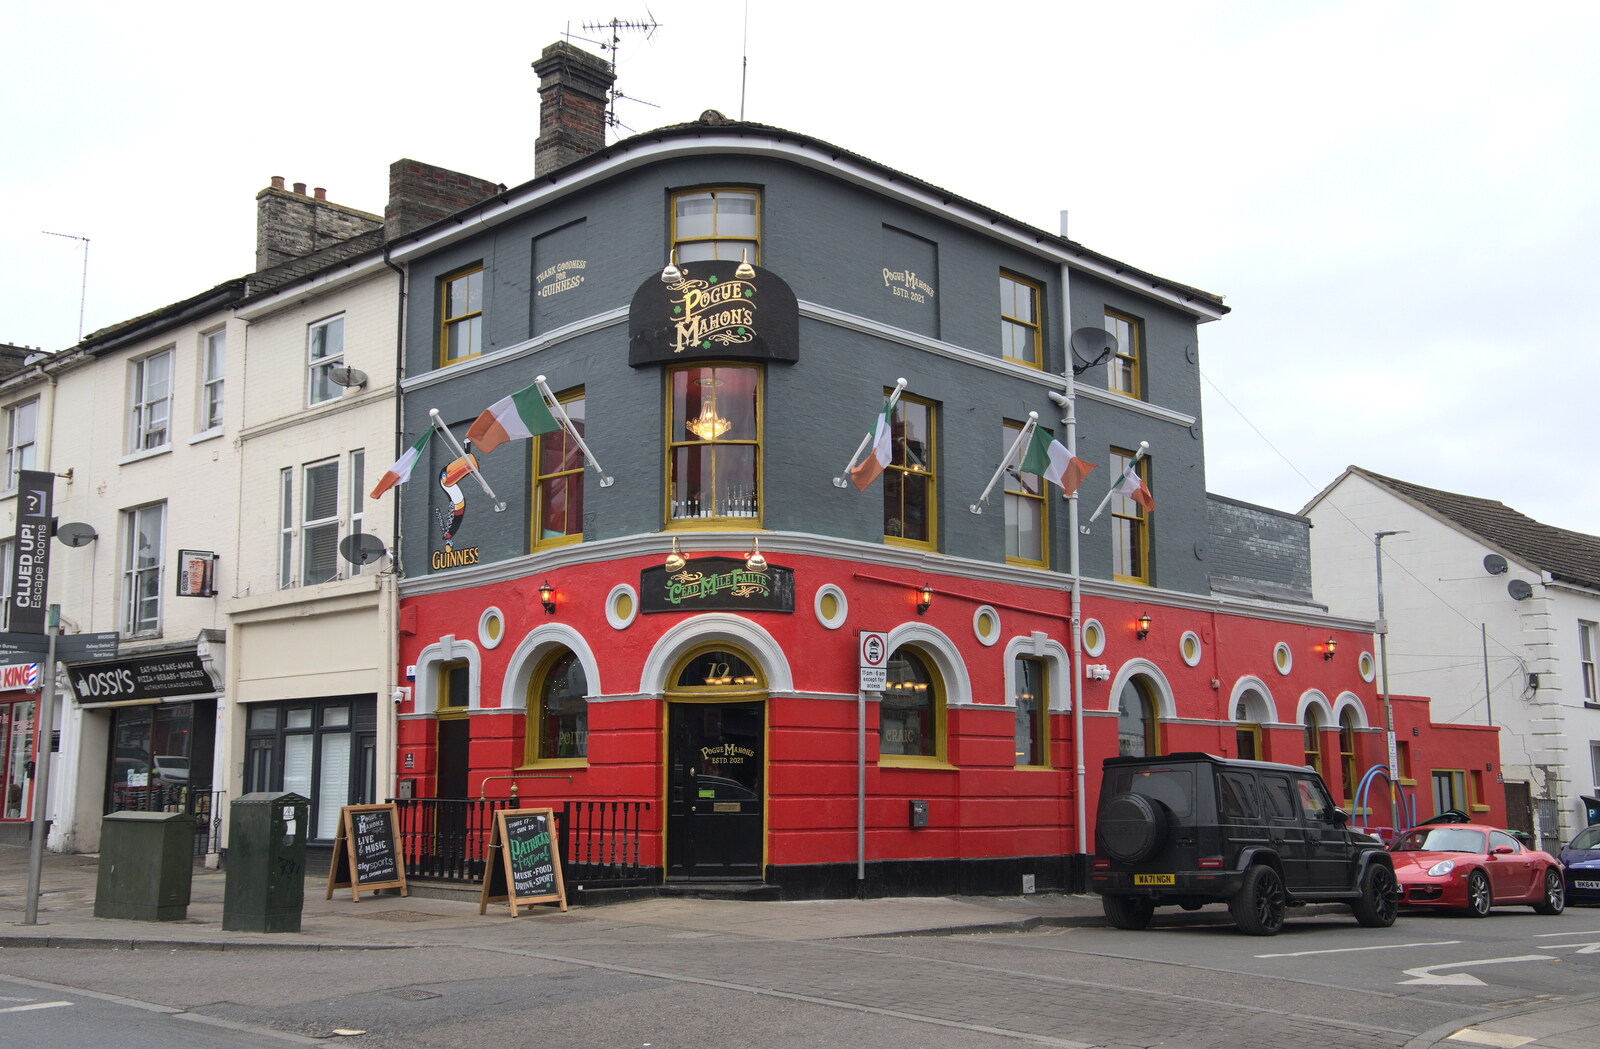 An actual Irish pub has appeared - Pogue Mahon's from The Lost Pubs of Norwich, Norfolk - 13th February 2022